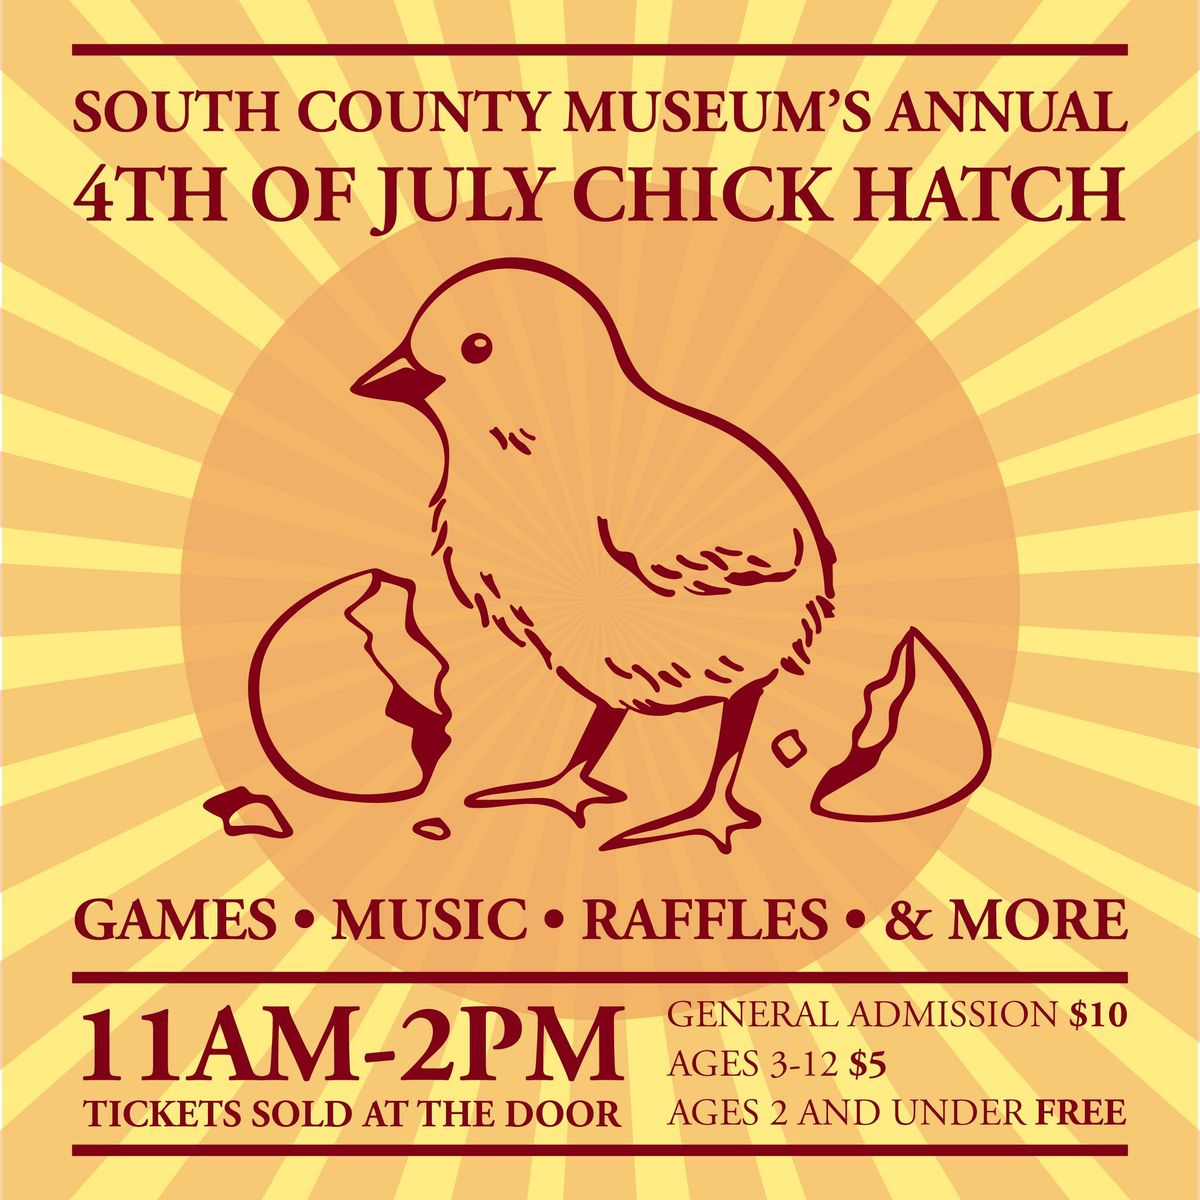 4th of July Chick Hatch